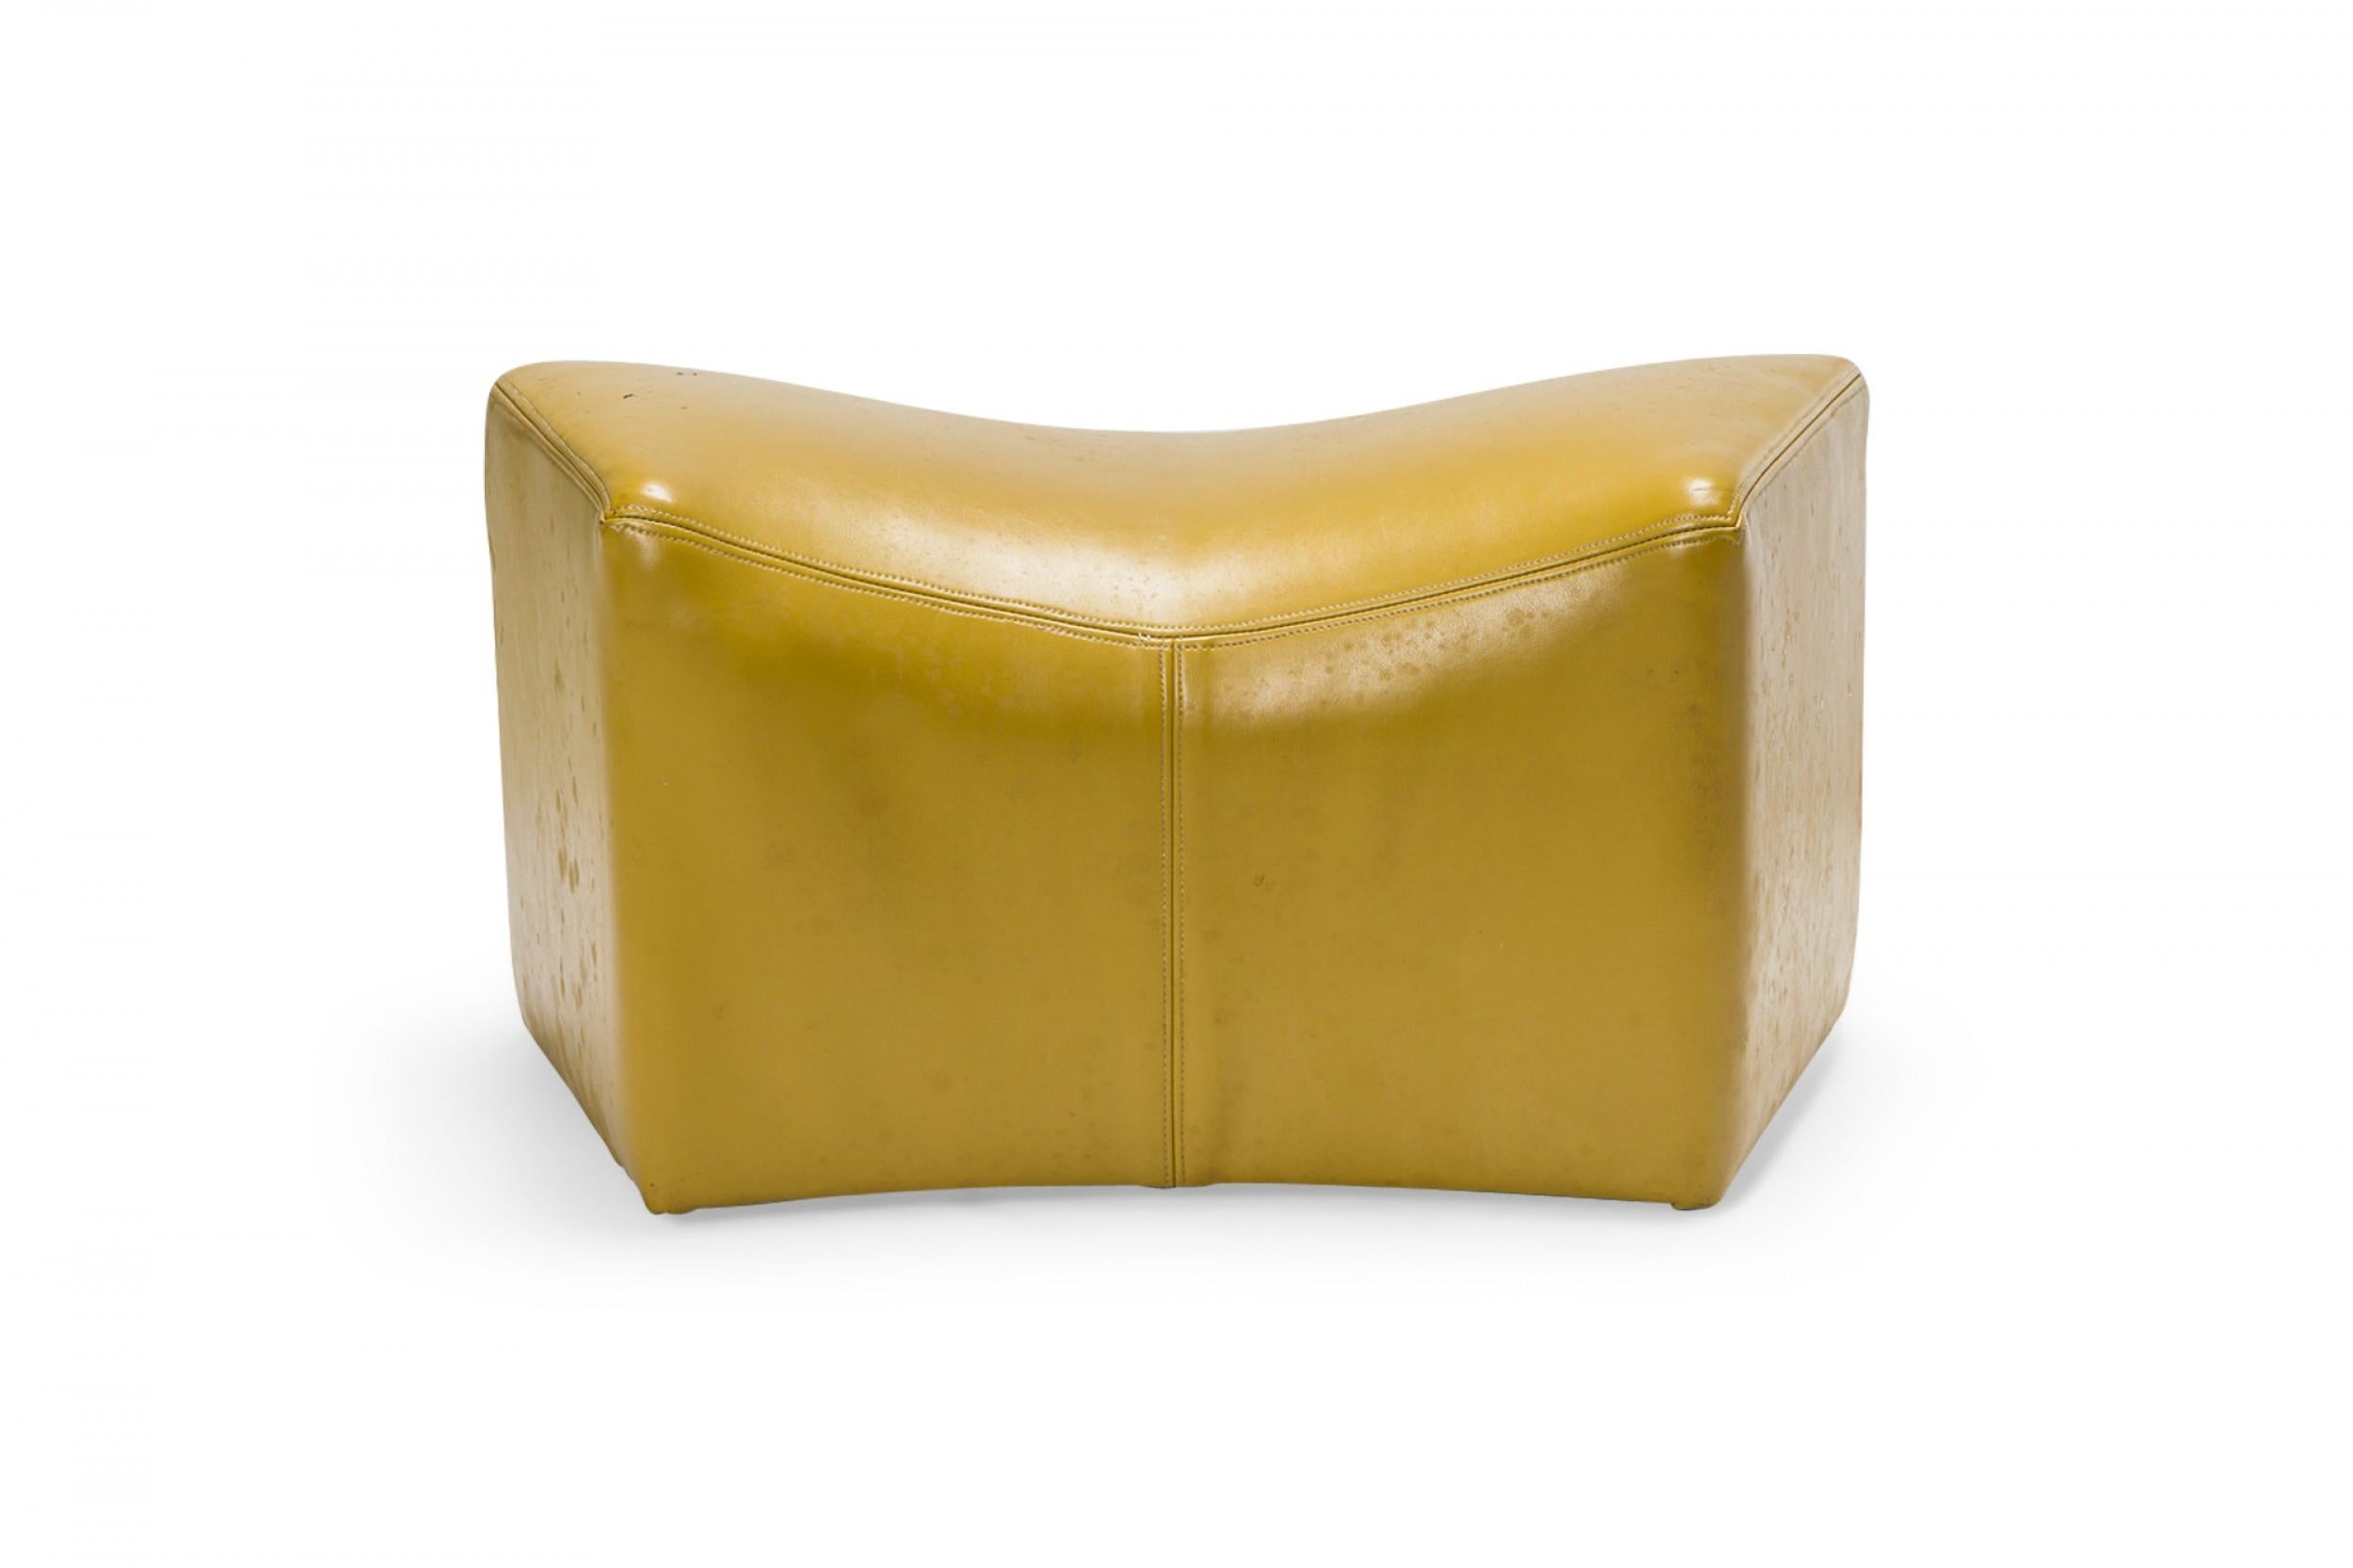 PAIR of American Mid-Century saddle ottomans with bright yellow leather upholstery. (PRICED AS PAIR)(Available in black upholstery: DUF0345)